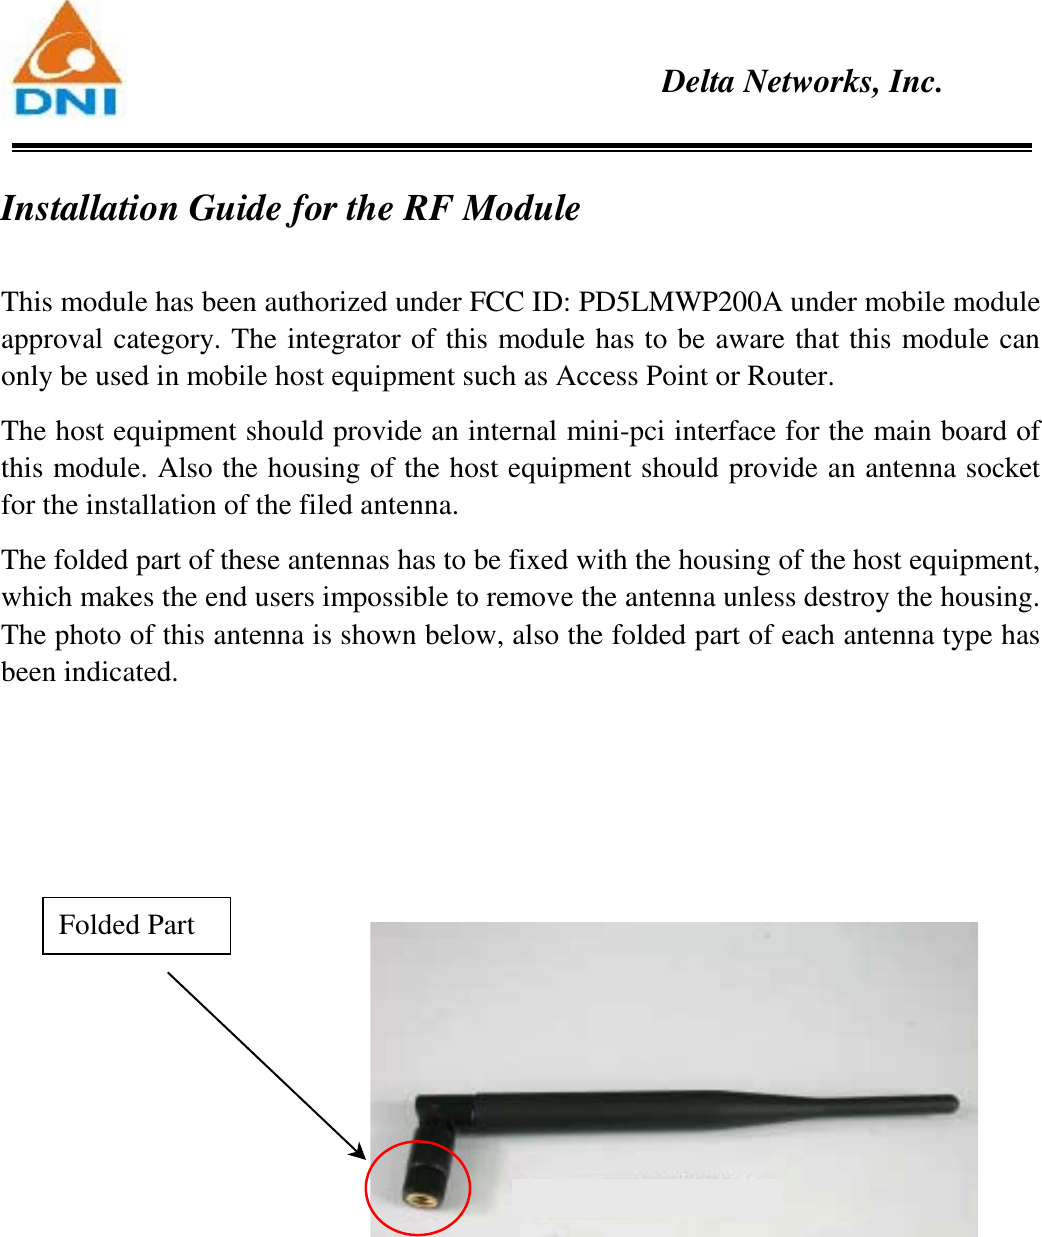    Delta Networks, Inc.  Installation Guide for the RF Module  This module has been authorized under FCC ID: PD5LMWP200A under mobile module approval category. The integrator of this module has to be aware that this module can only be used in mobile host equipment such as Access Point or Router.   The host equipment should provide an internal mini-pci interface for the main board of this module. Also the housing of the host equipment should provide an antenna socket for the installation of the filed antenna.   The folded part of these antennas has to be fixed with the housing of the host equipment, which makes the end users impossible to remove the antenna unless destroy the housing. The photo of this antenna is shown below, also the folded part of each antenna type has been indicated.    Folded Part 